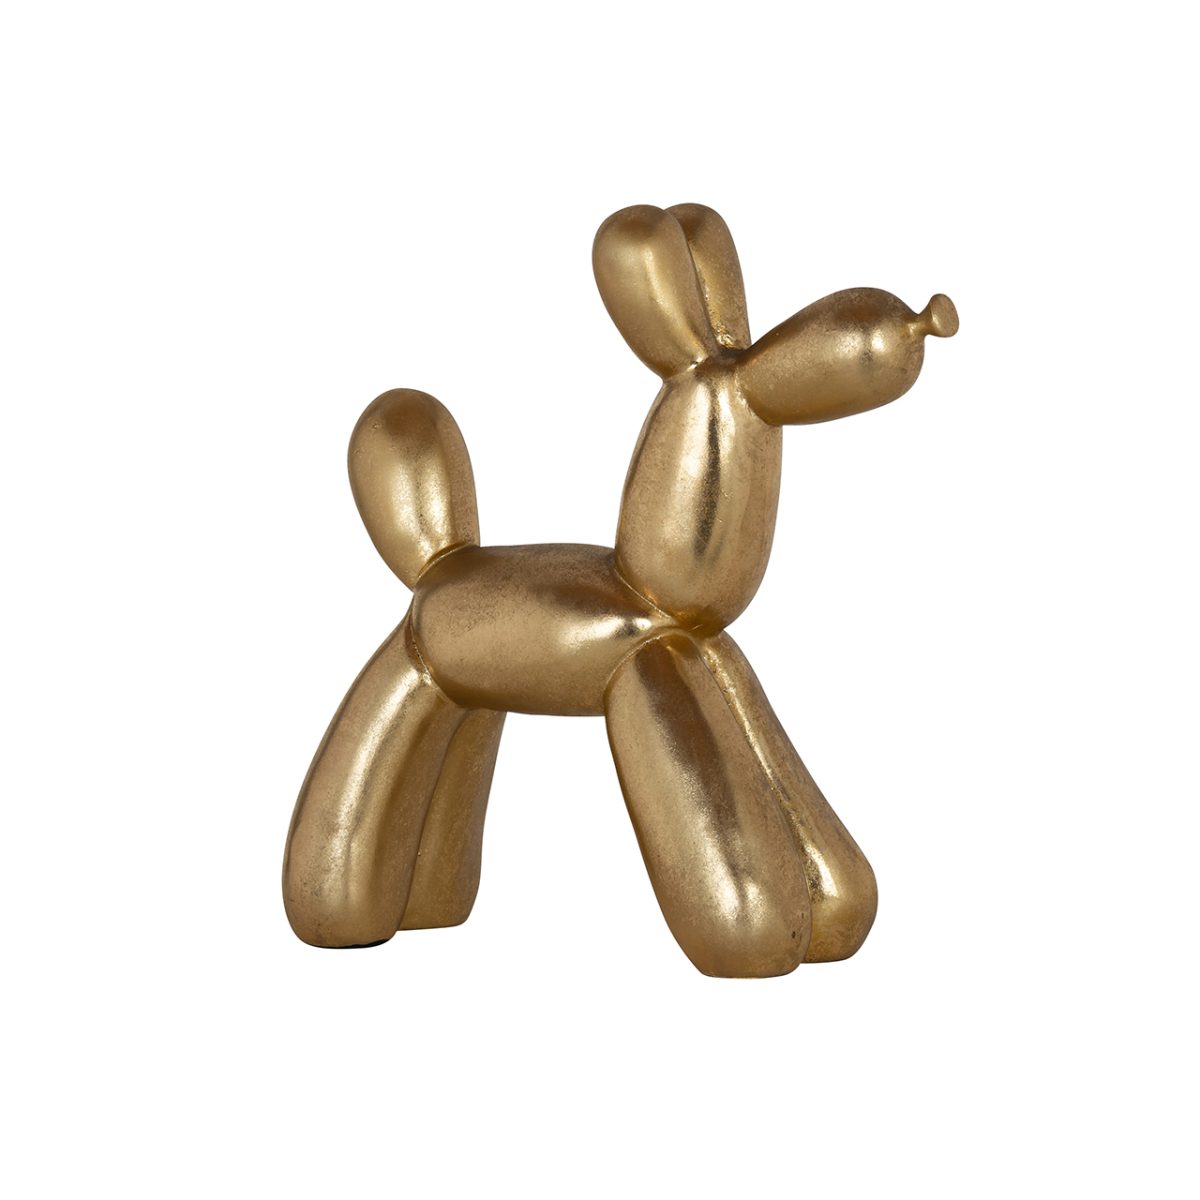 -AD-0006 - Dog deco object (Gold)